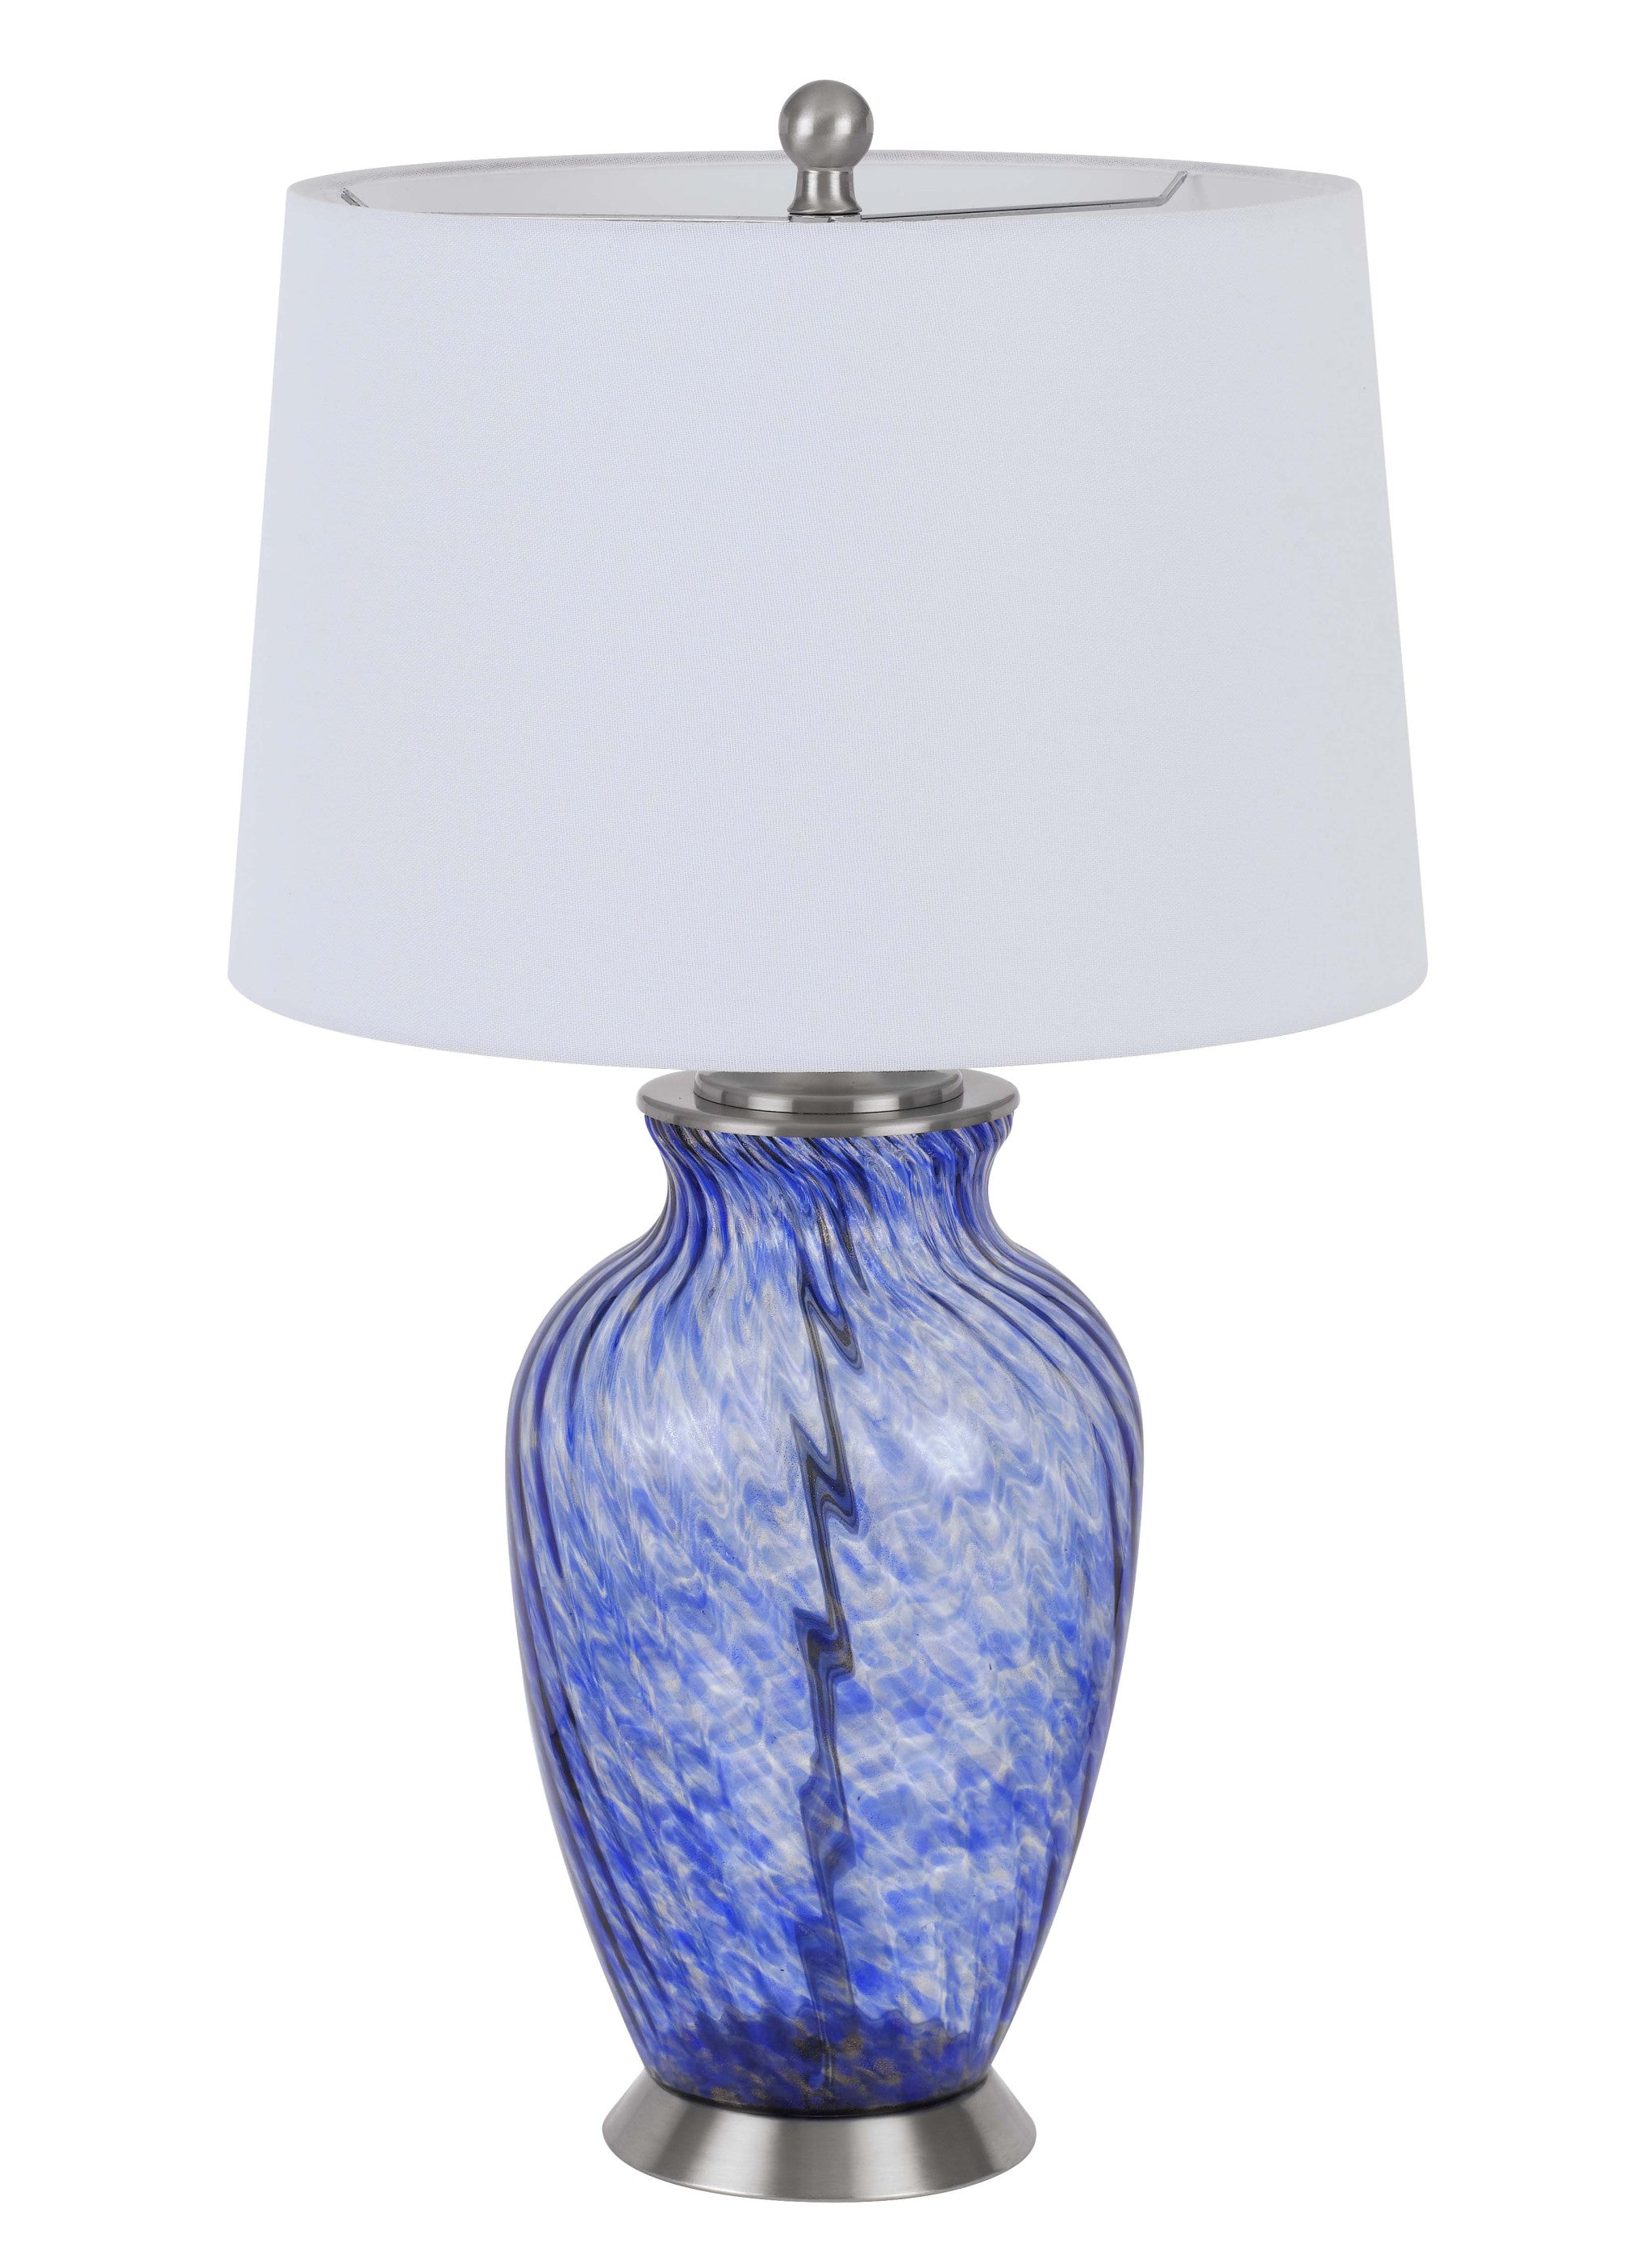 28" Blue Swirl Glass Table Lamp With White Empire Shade